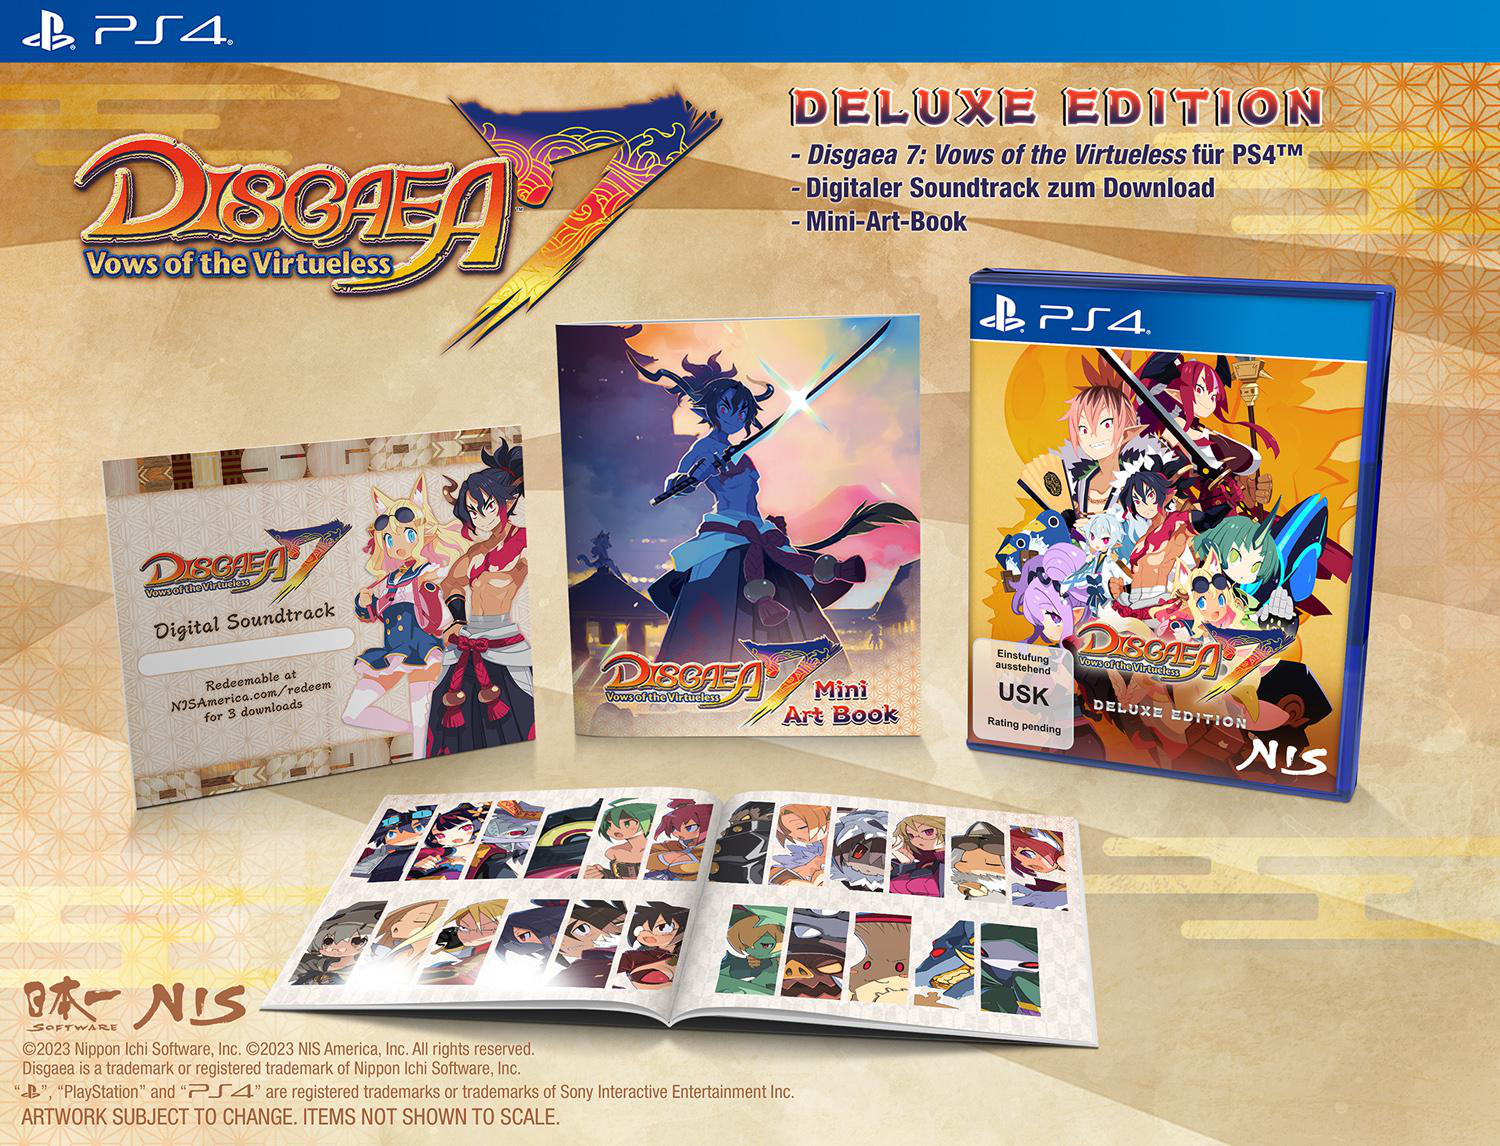 of Deluxe Vows - 4] Disgaea [PlayStation 7: - the Edition Virtueless